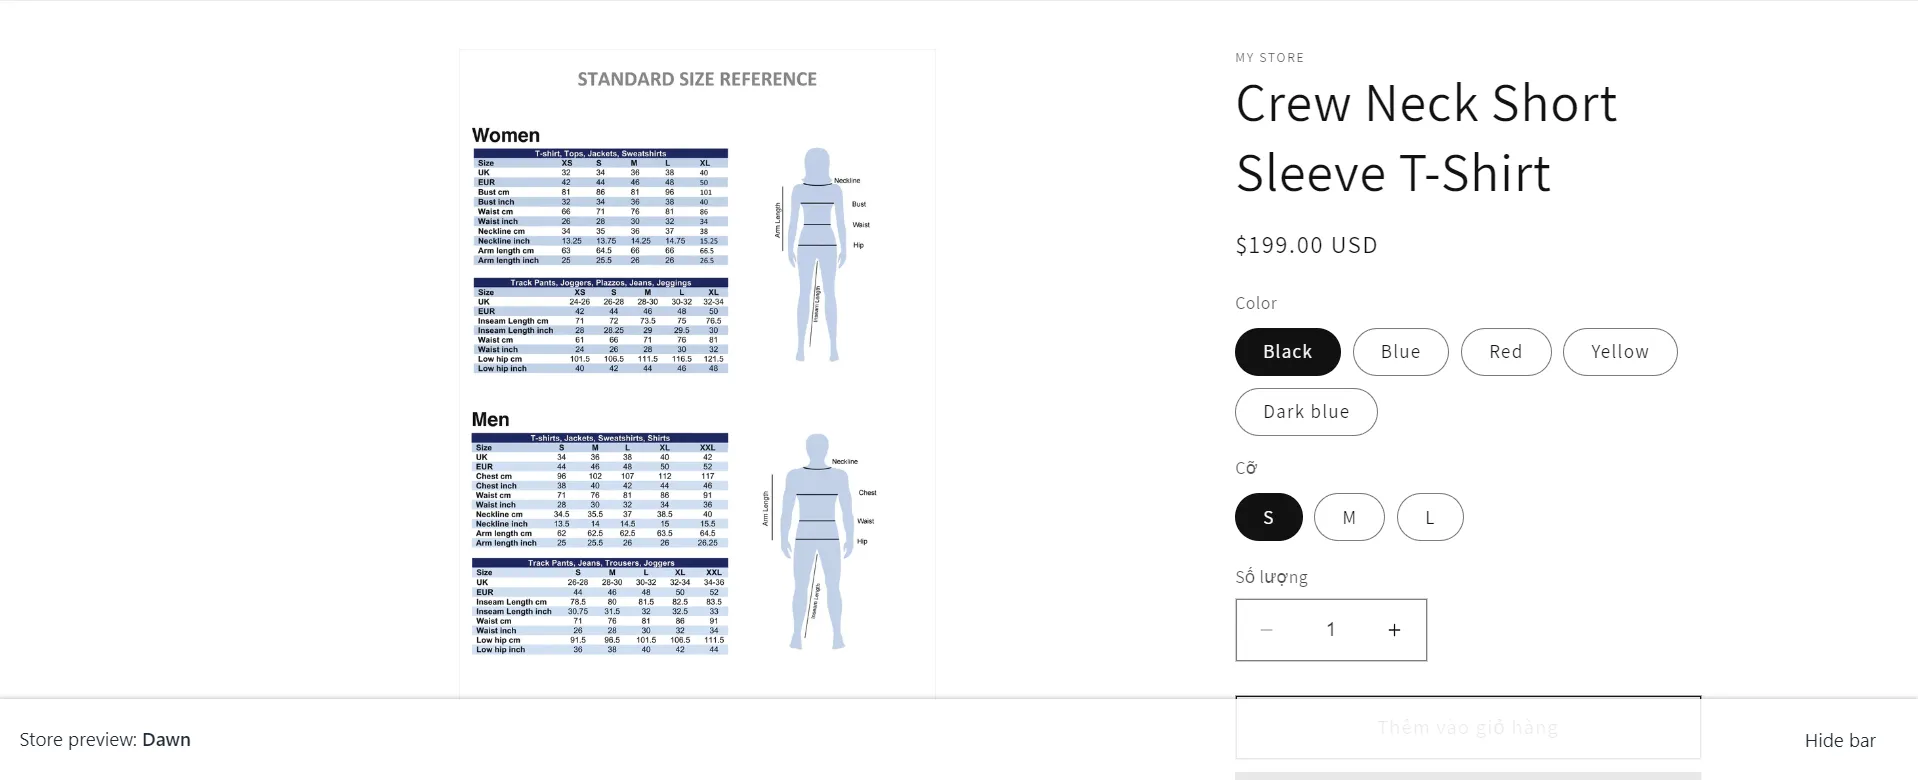 One of the size chart examples on product pages